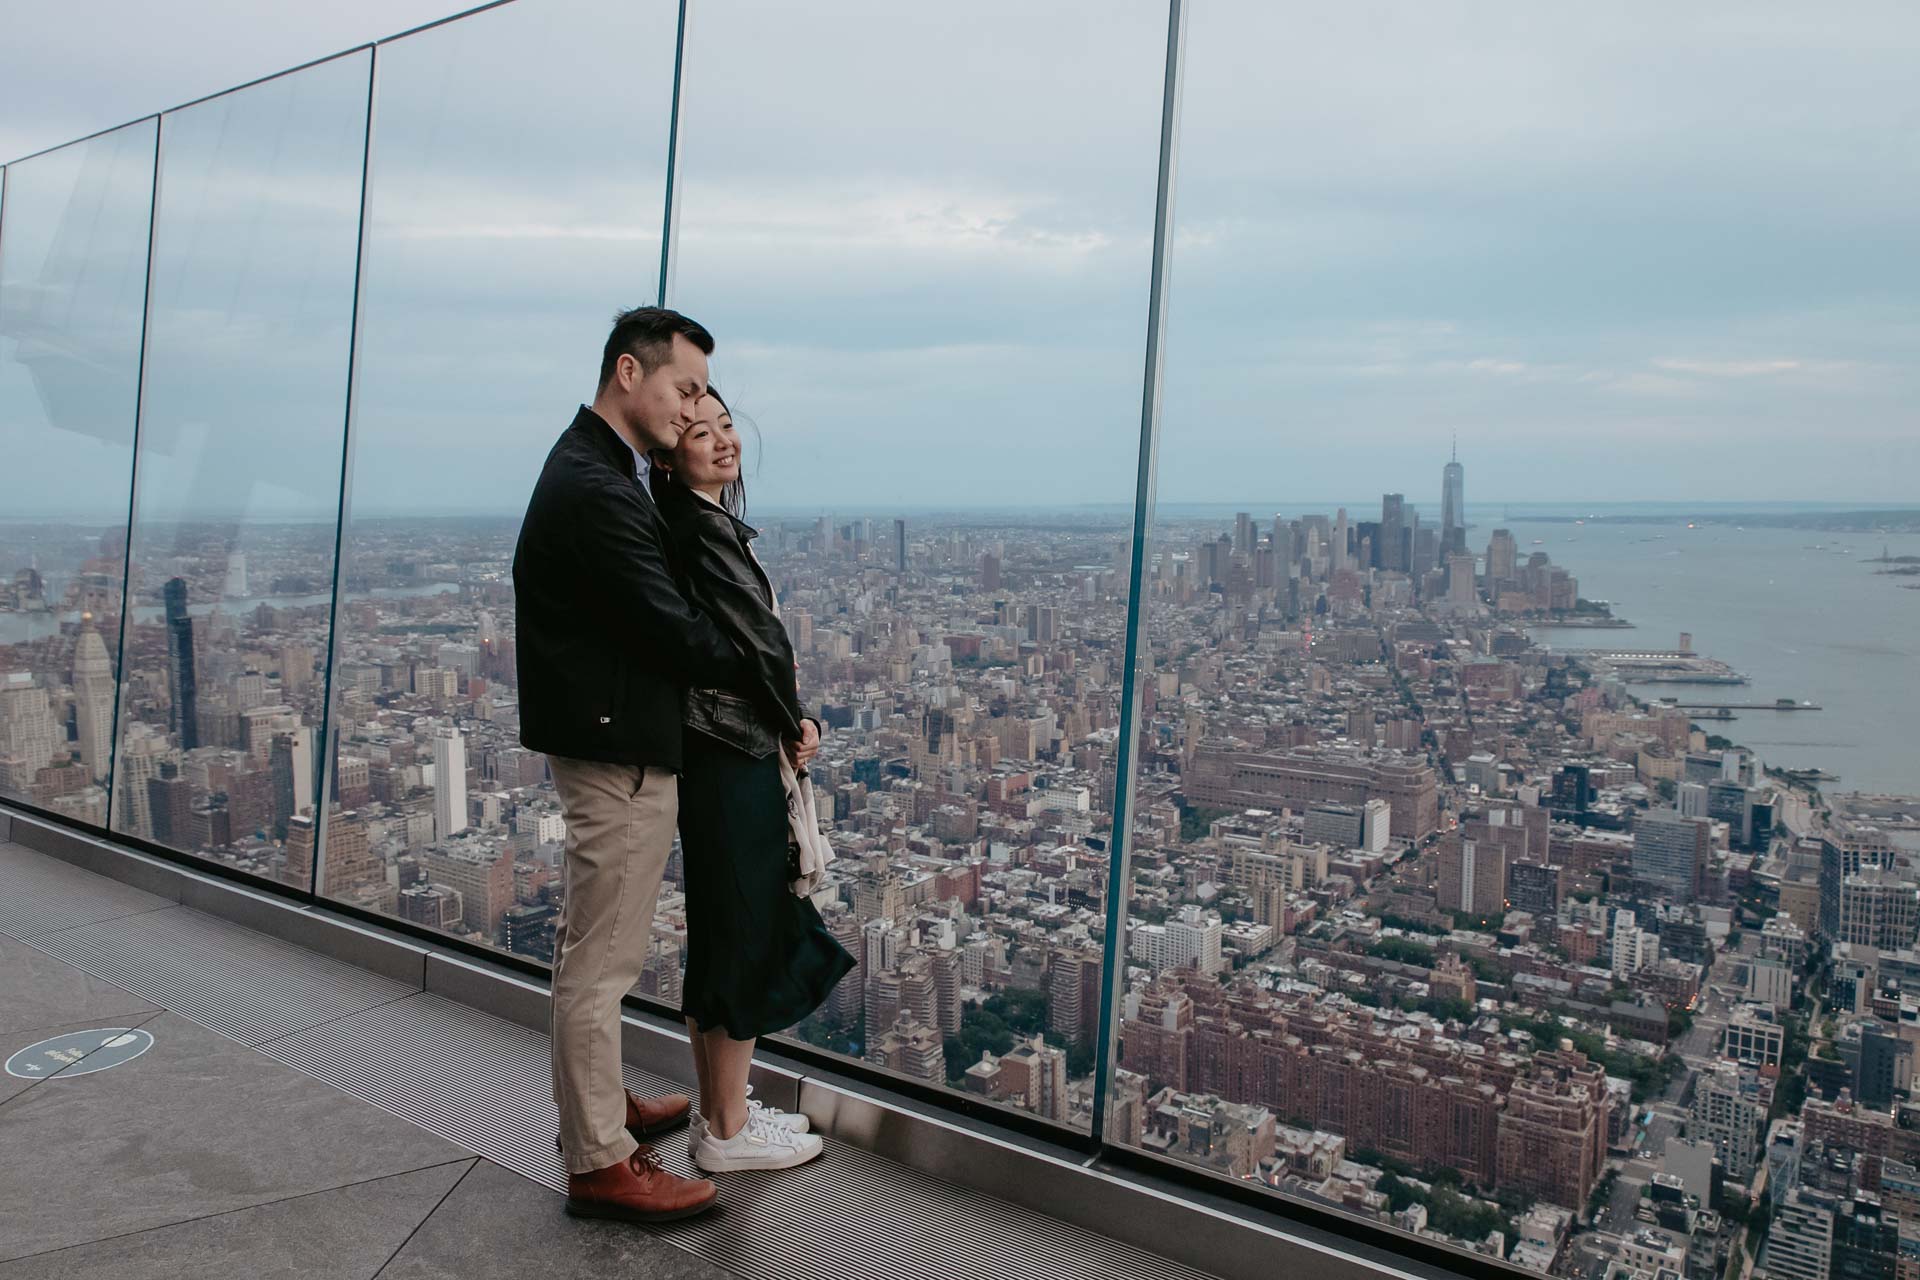 proposal photographer at the edge in hudson yards, nyc